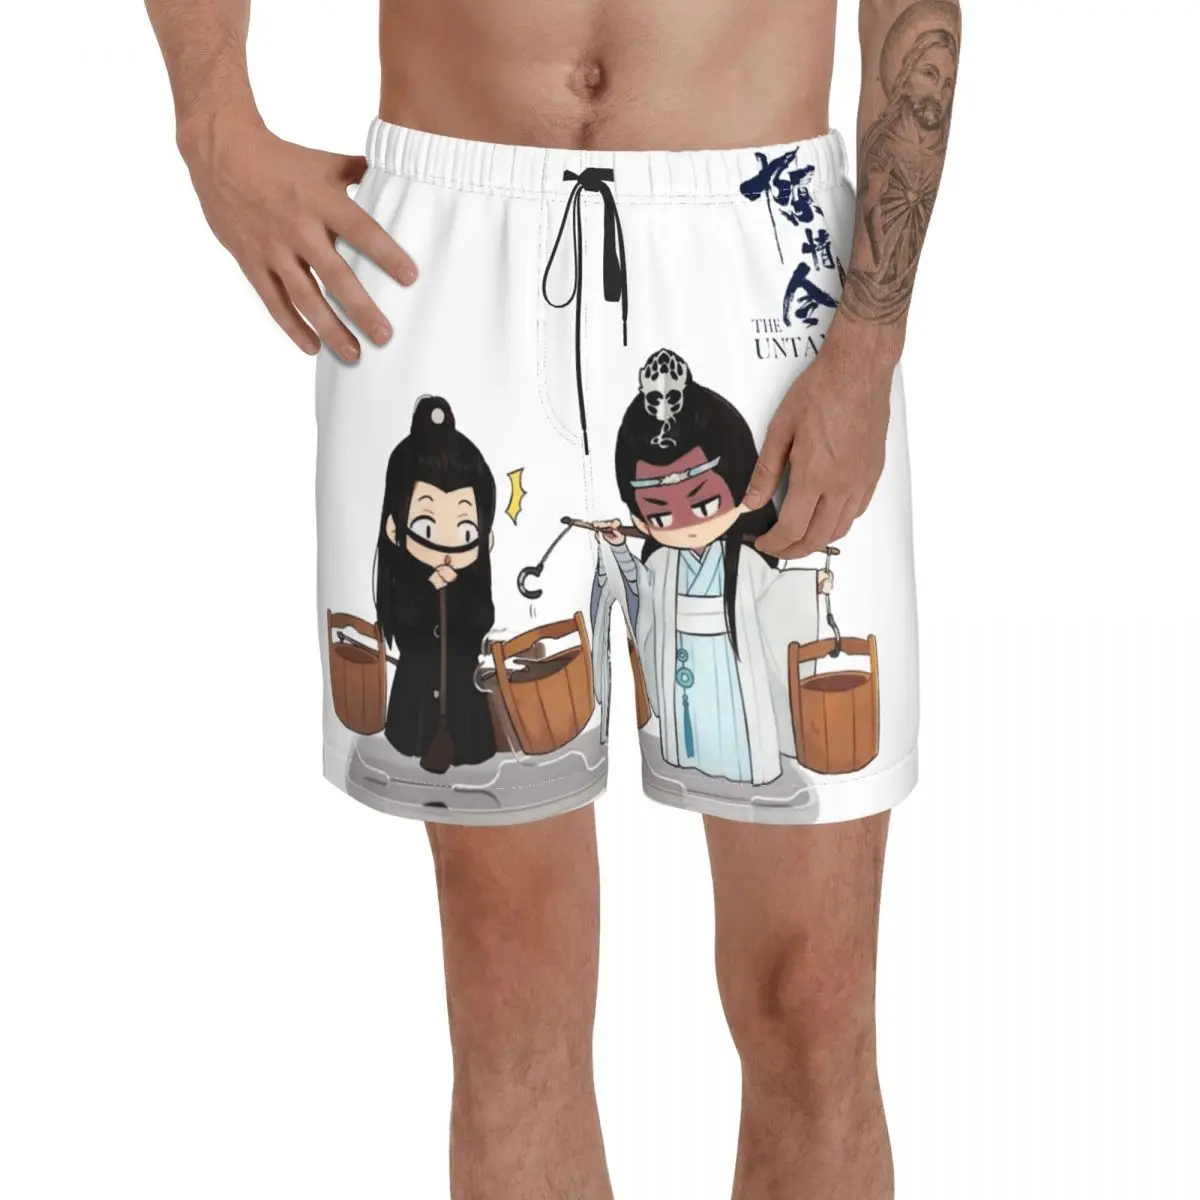 

Promo The Untamed 5 Anime Causal Breathable Quick Dry Unique print The Untamed running Male Shorts